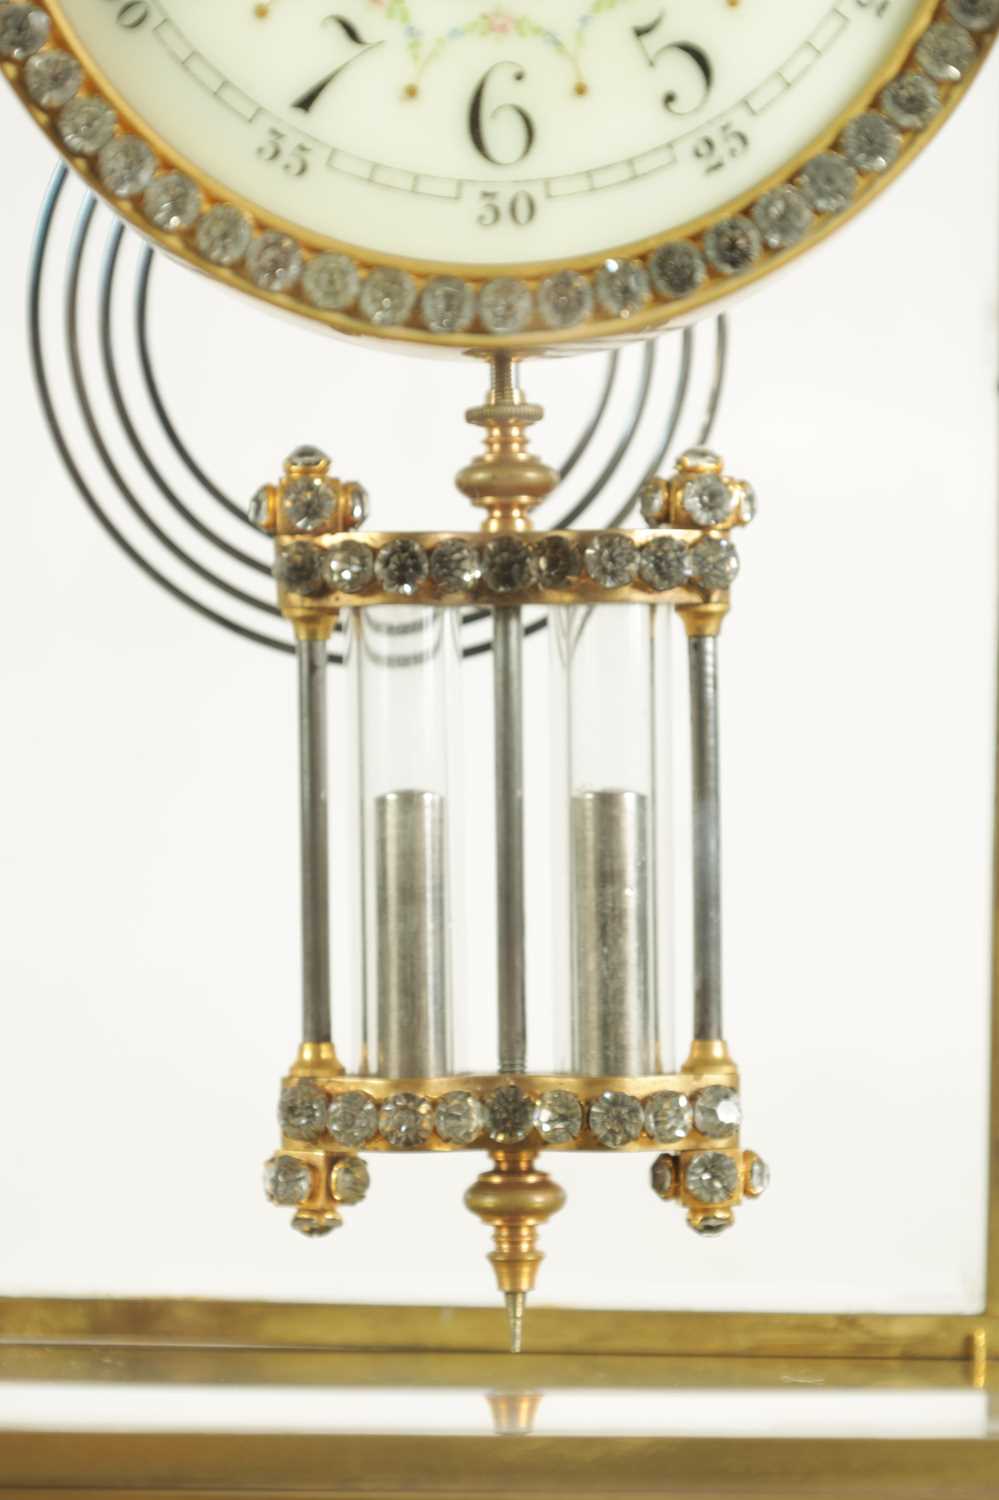 A LATE 19TH CENTURY FRENCH BRASS AND CHAMPLEVE ENAMEL FOUR-GLASS MANTEL CLOCK - Image 6 of 10